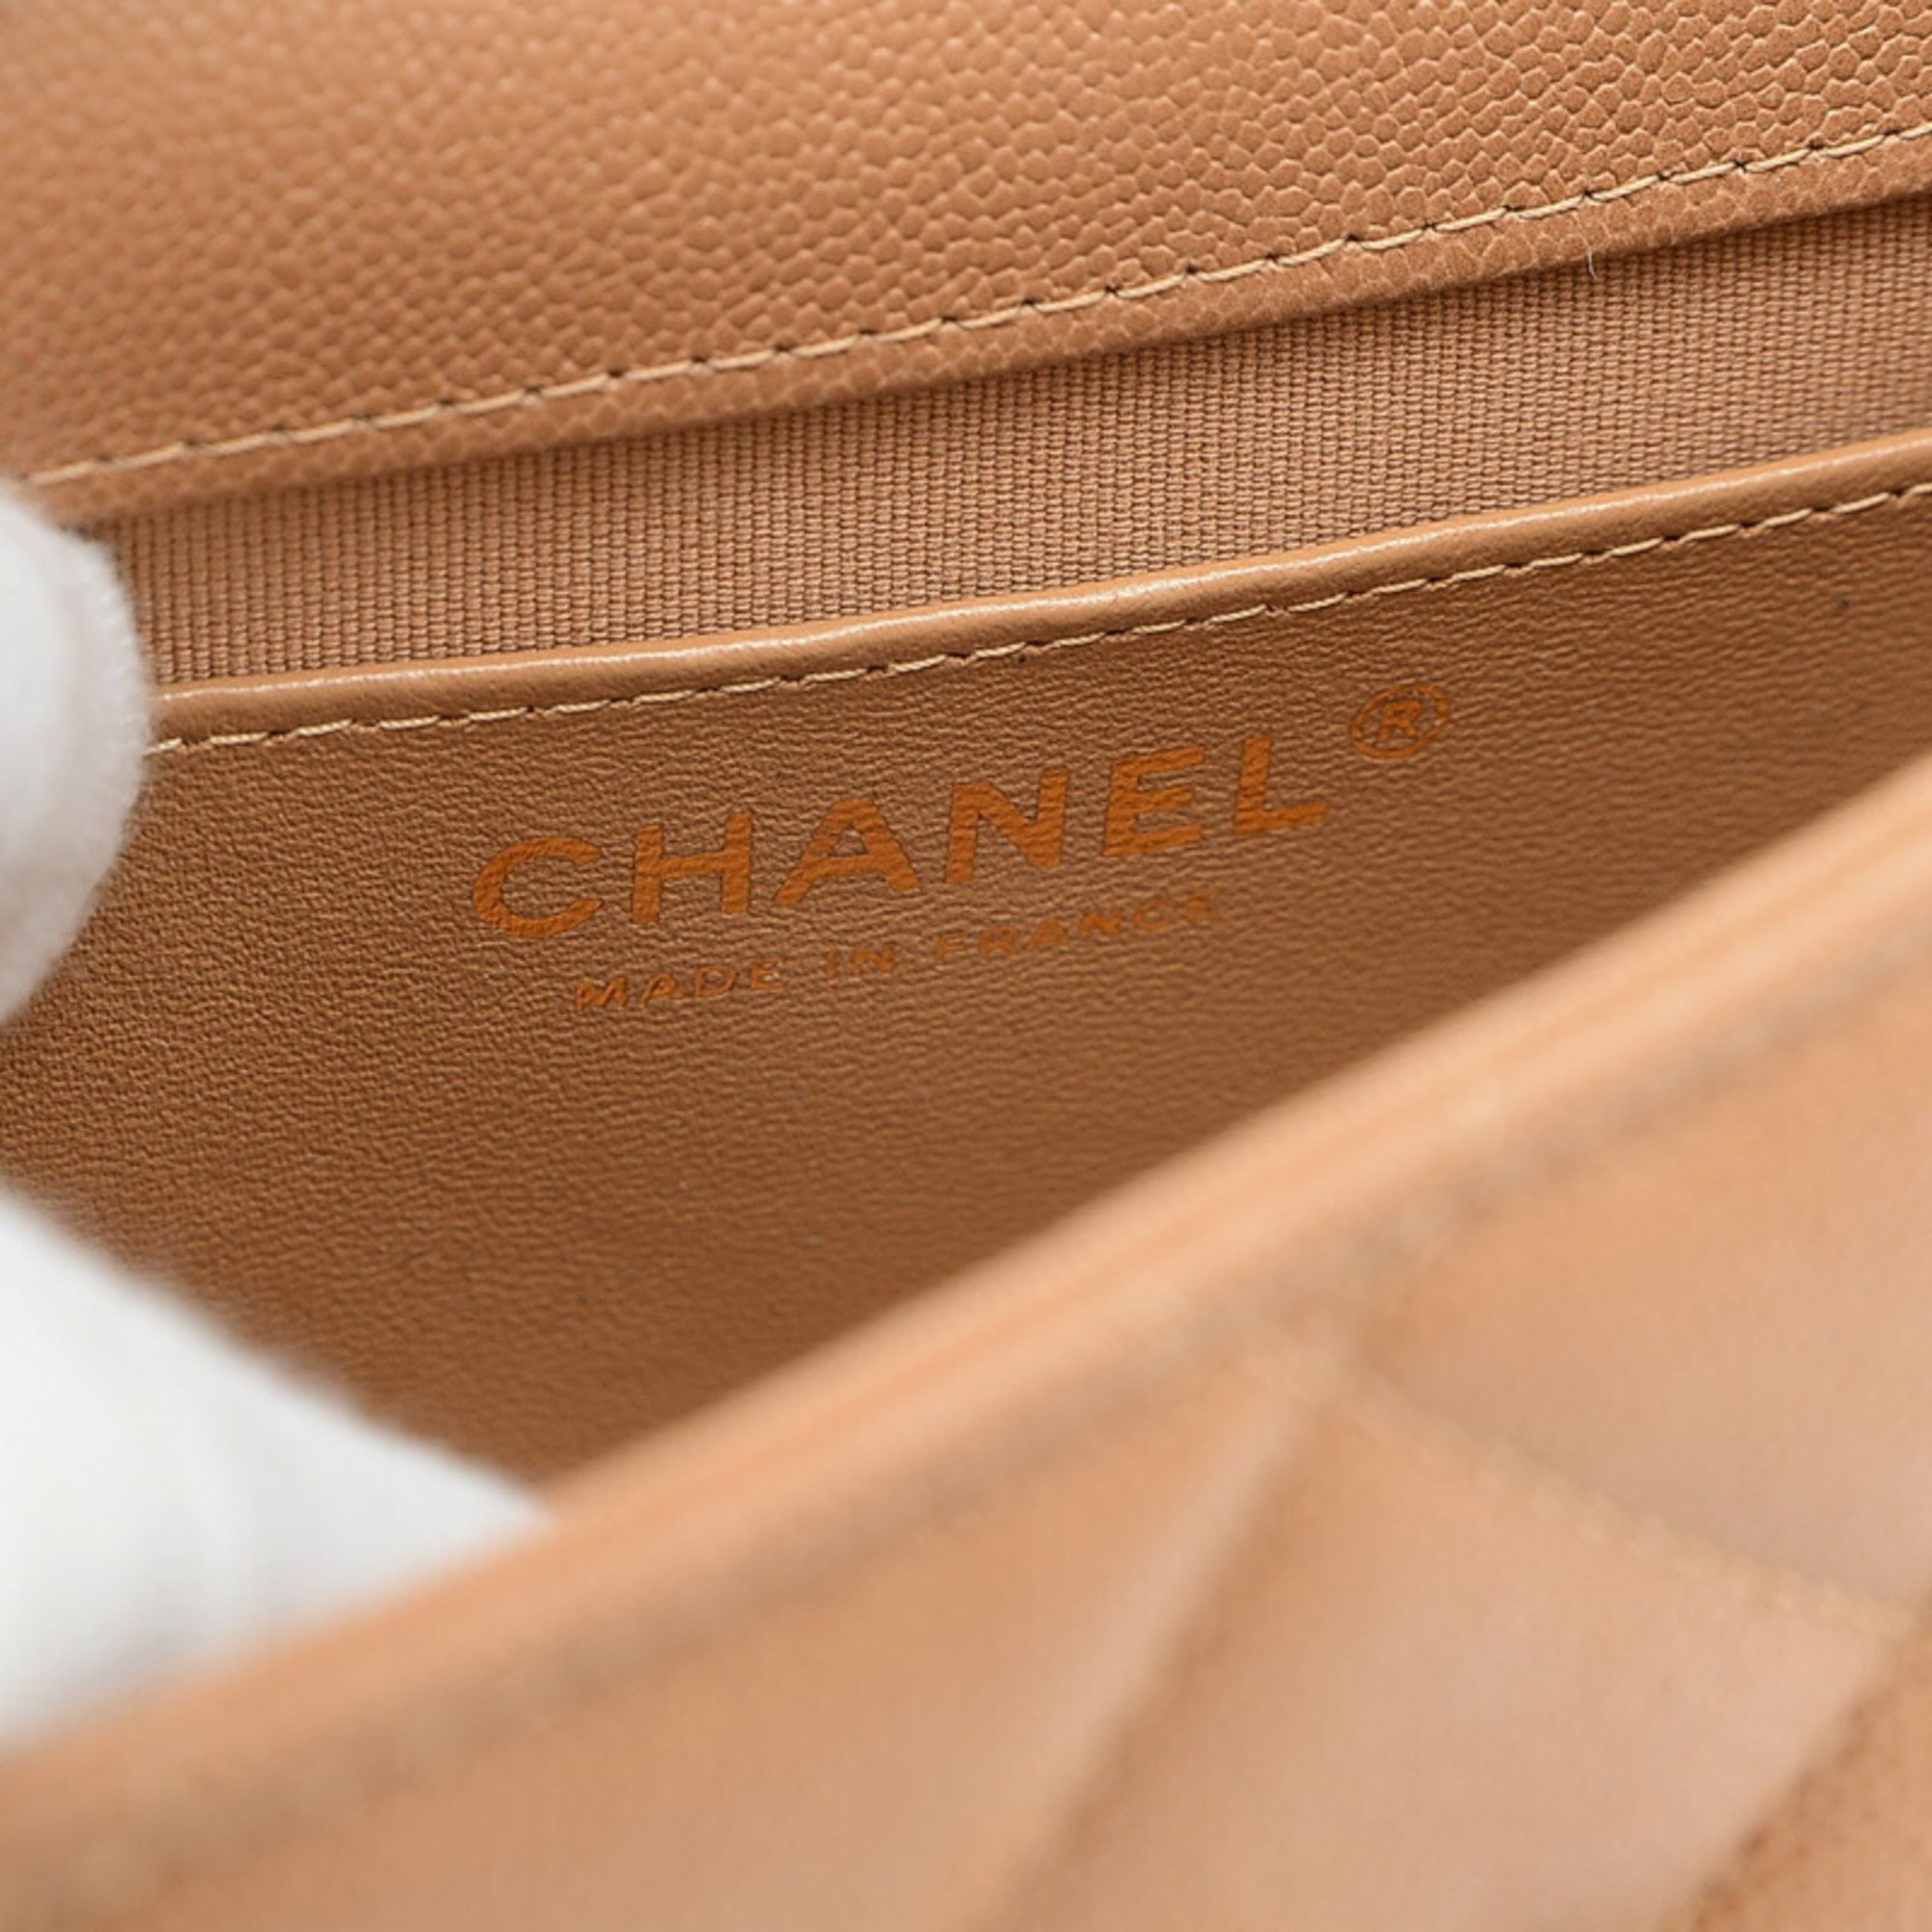 Chanel Beige Leather Small Flap Bag